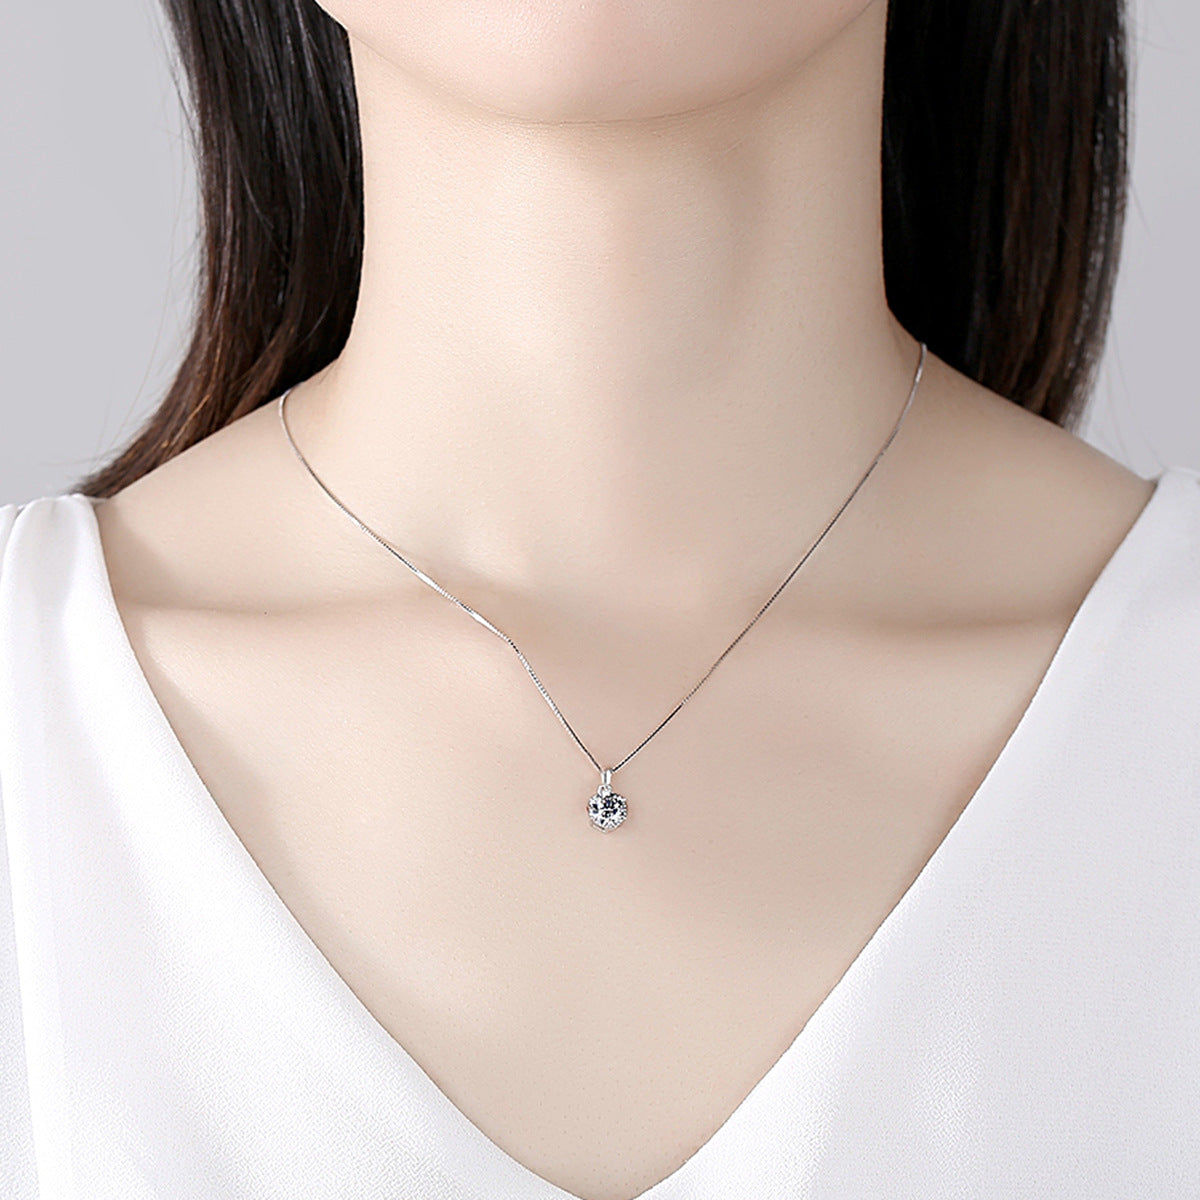 1 Carat Moissanite and Silver Pendant with a Box Chain